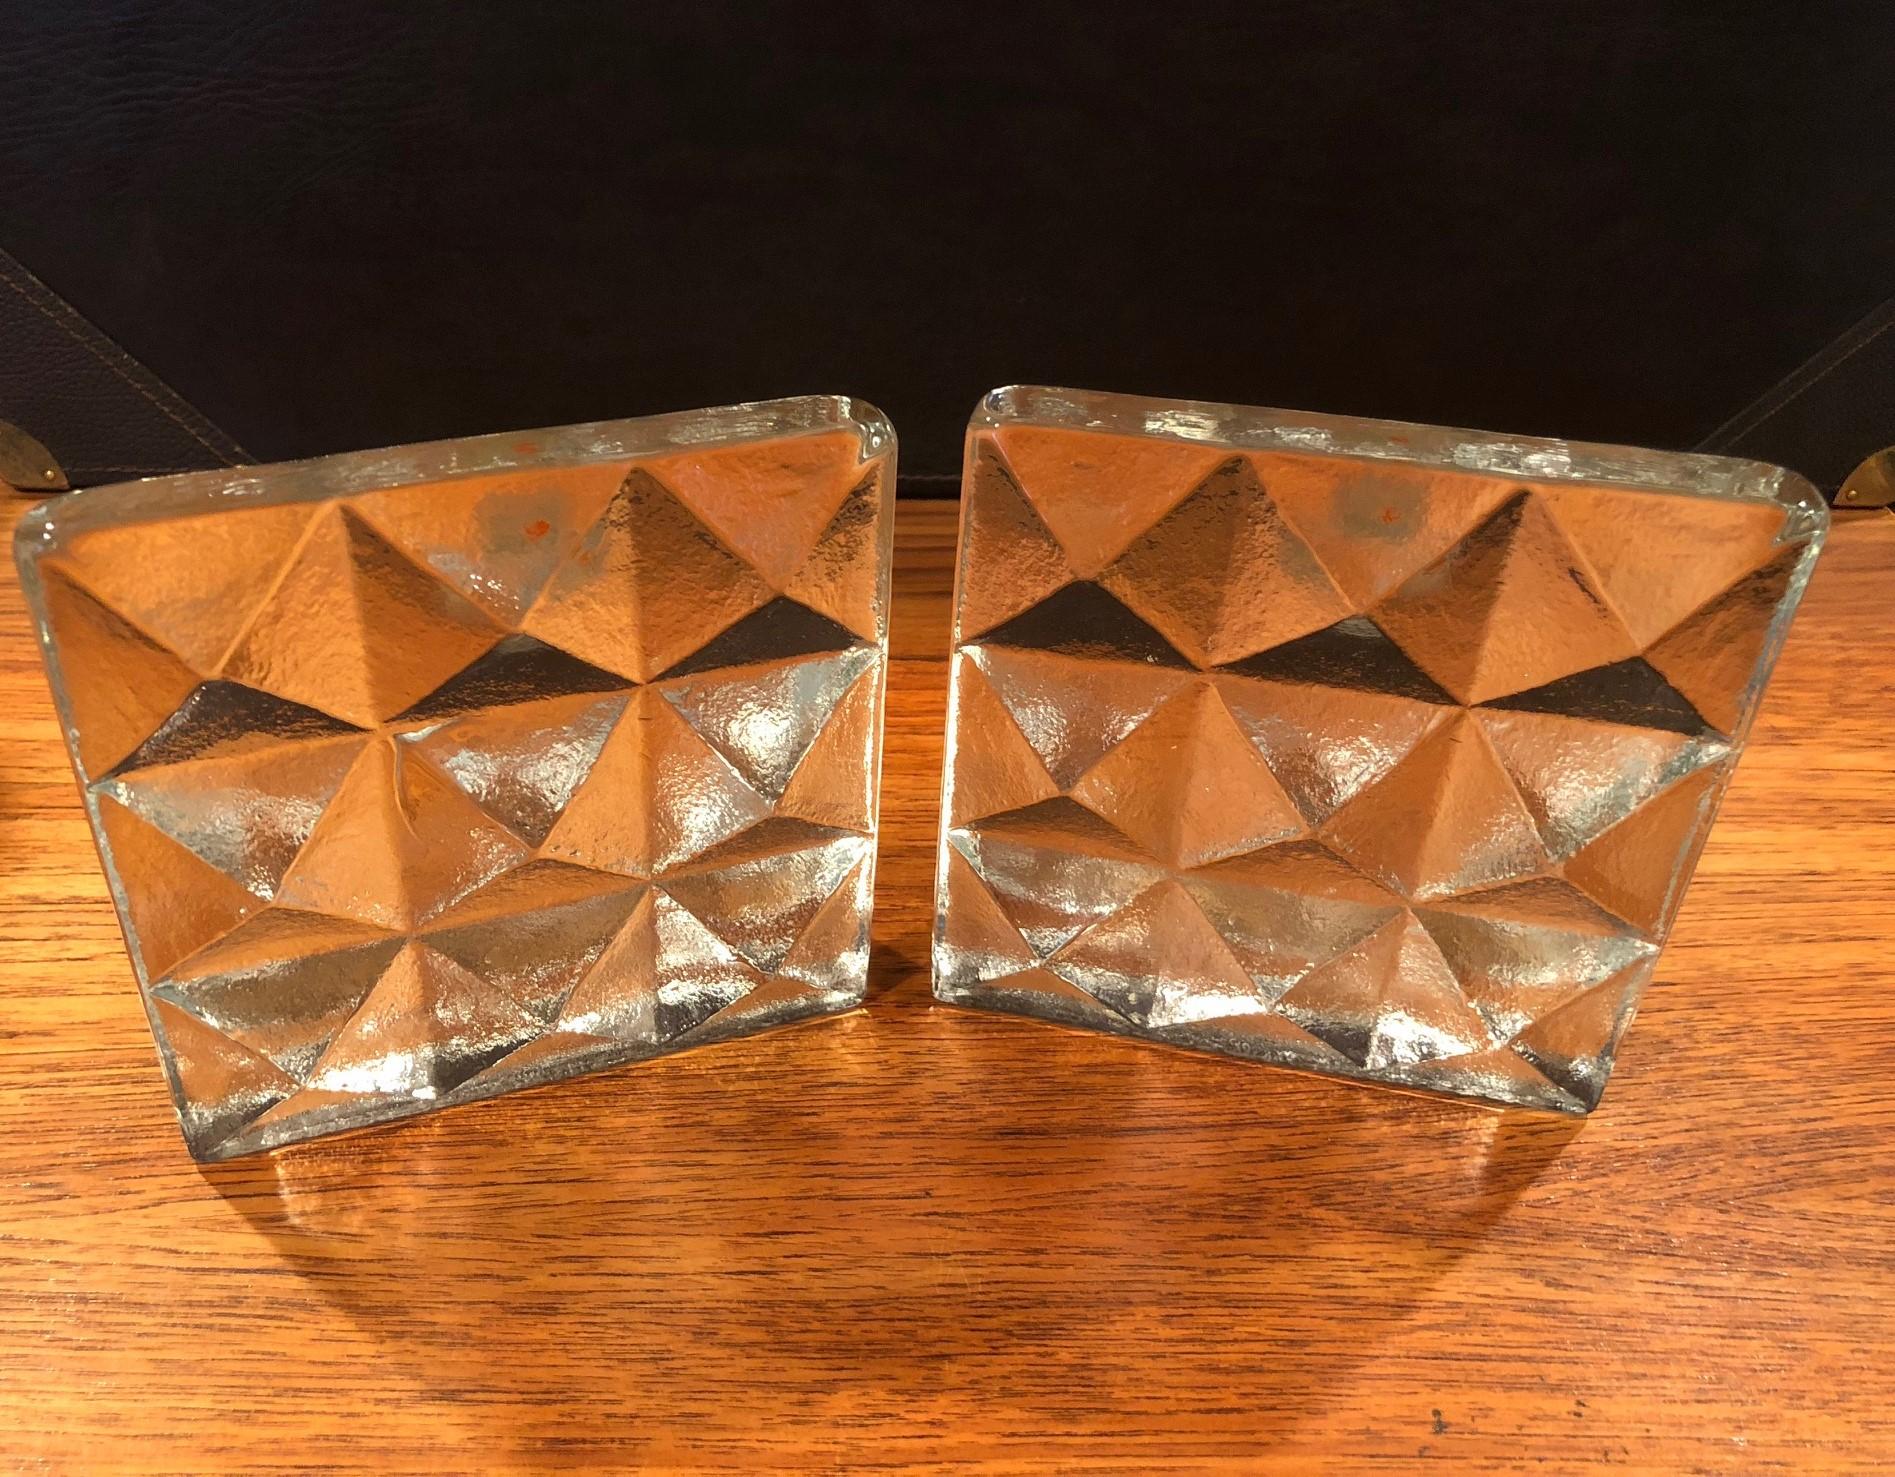 Nice pair of clear glass bookends with three-dimensional pyramid design by Blenko, circa 1980s.